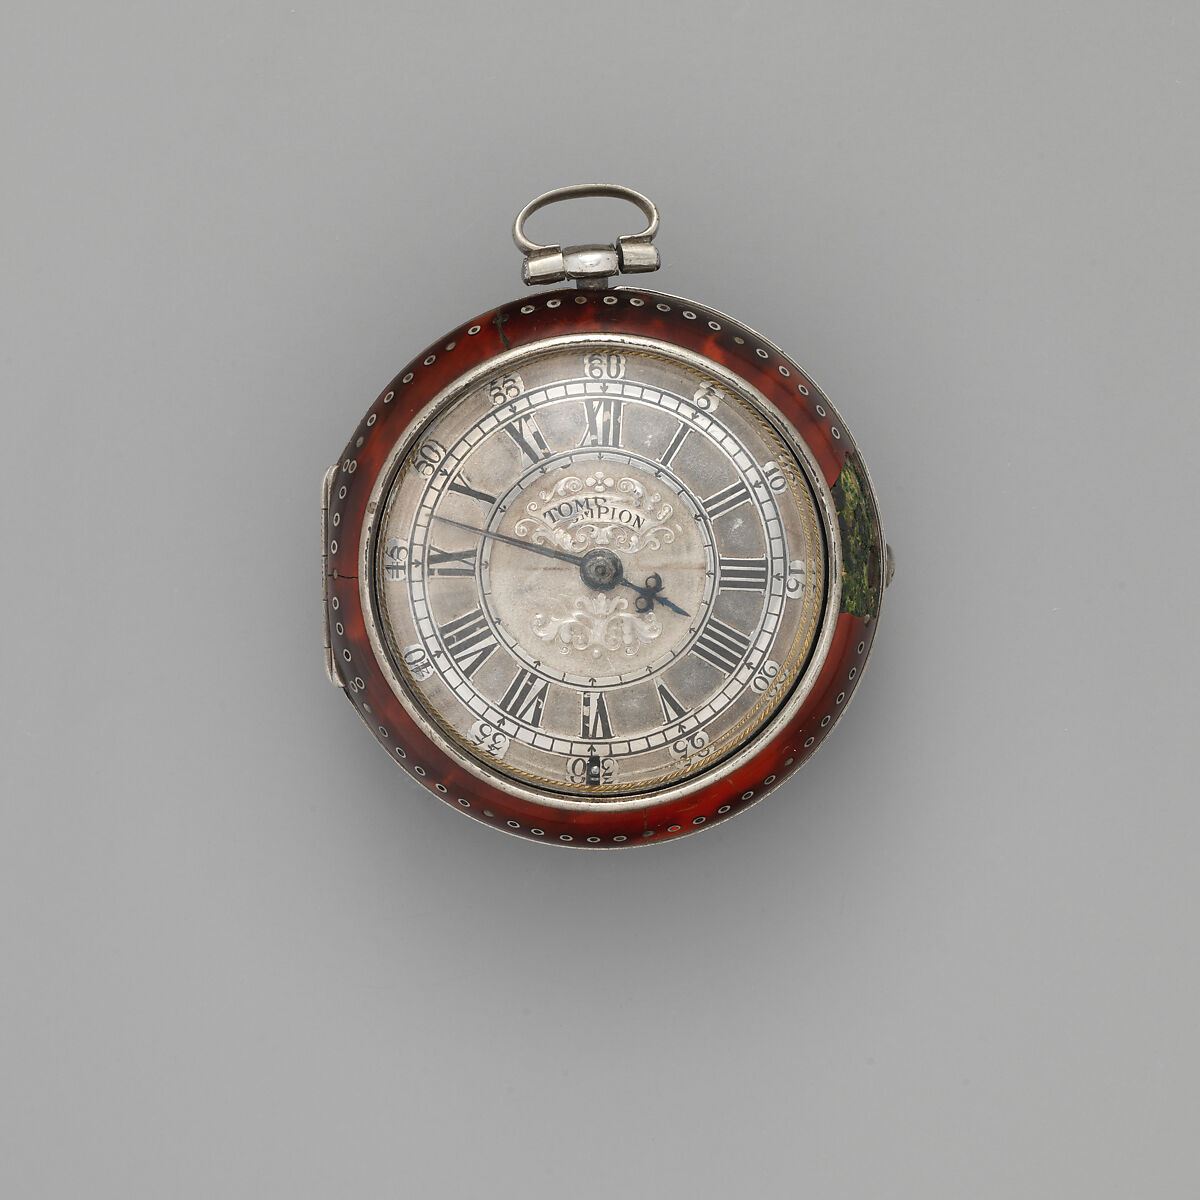 Pair-case watch, Watchmaker: Thomas Tompion (British, 1639–1713), Outer case: red tortoiseshell with silver inlay; Inner case and champlevé dial: silver, British, London 